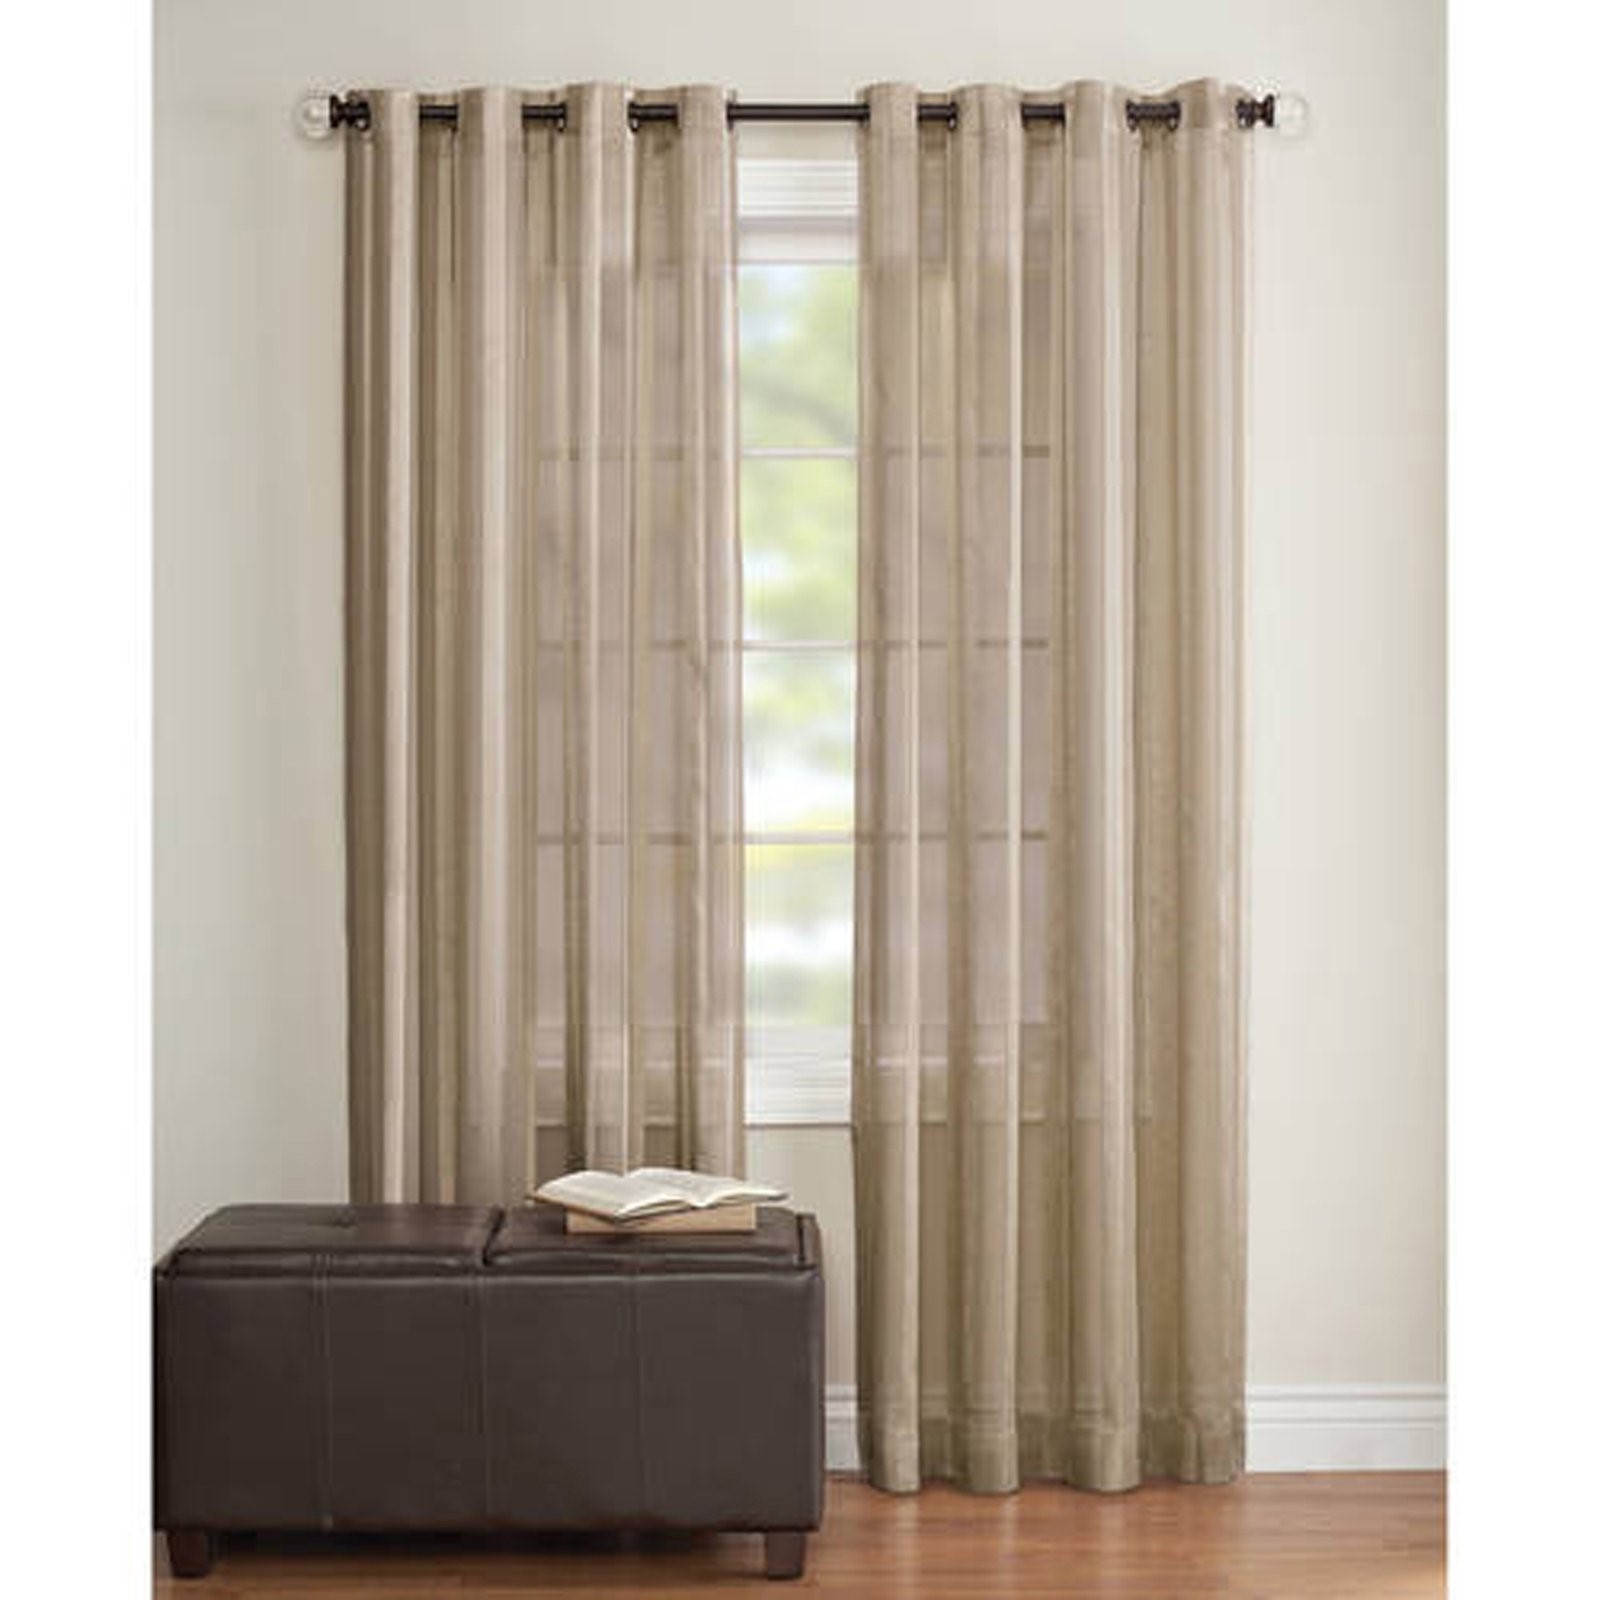 Better Homes and Gardens Toby Textured Stripe Sheer Window Curtain Panel - image 2 of 4